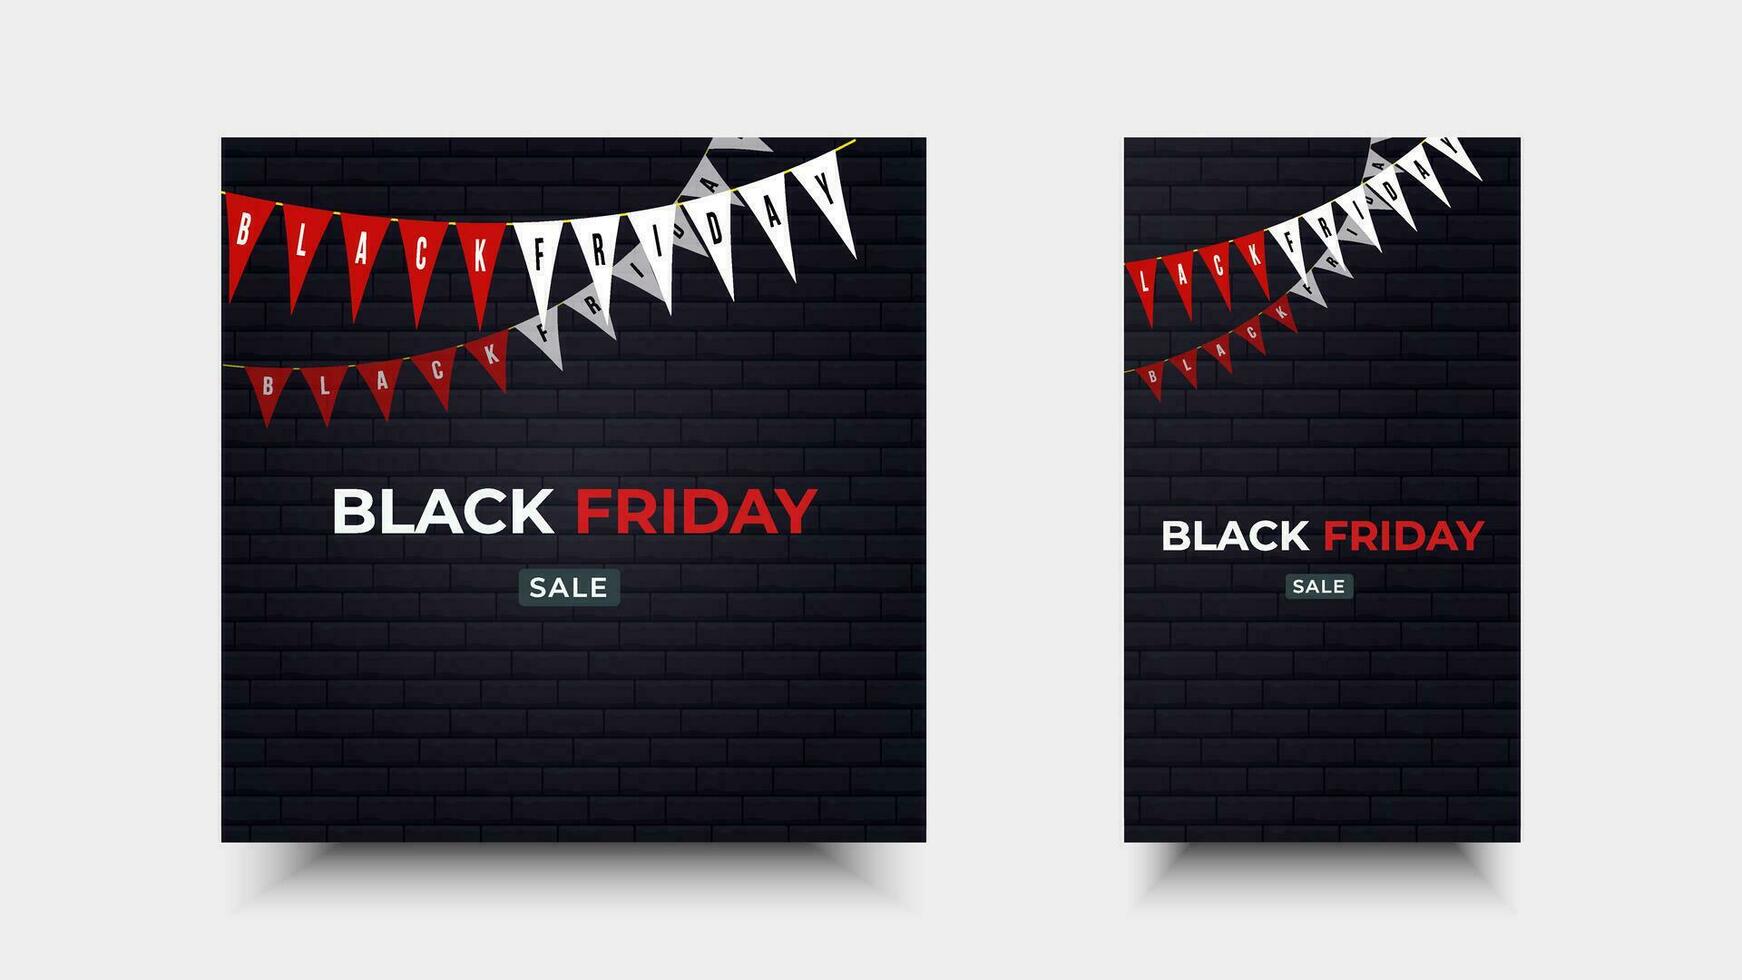 Black friday sale design. Illustration of glowing brick wall and flag ornament for promotion, advertising, banner, background vector